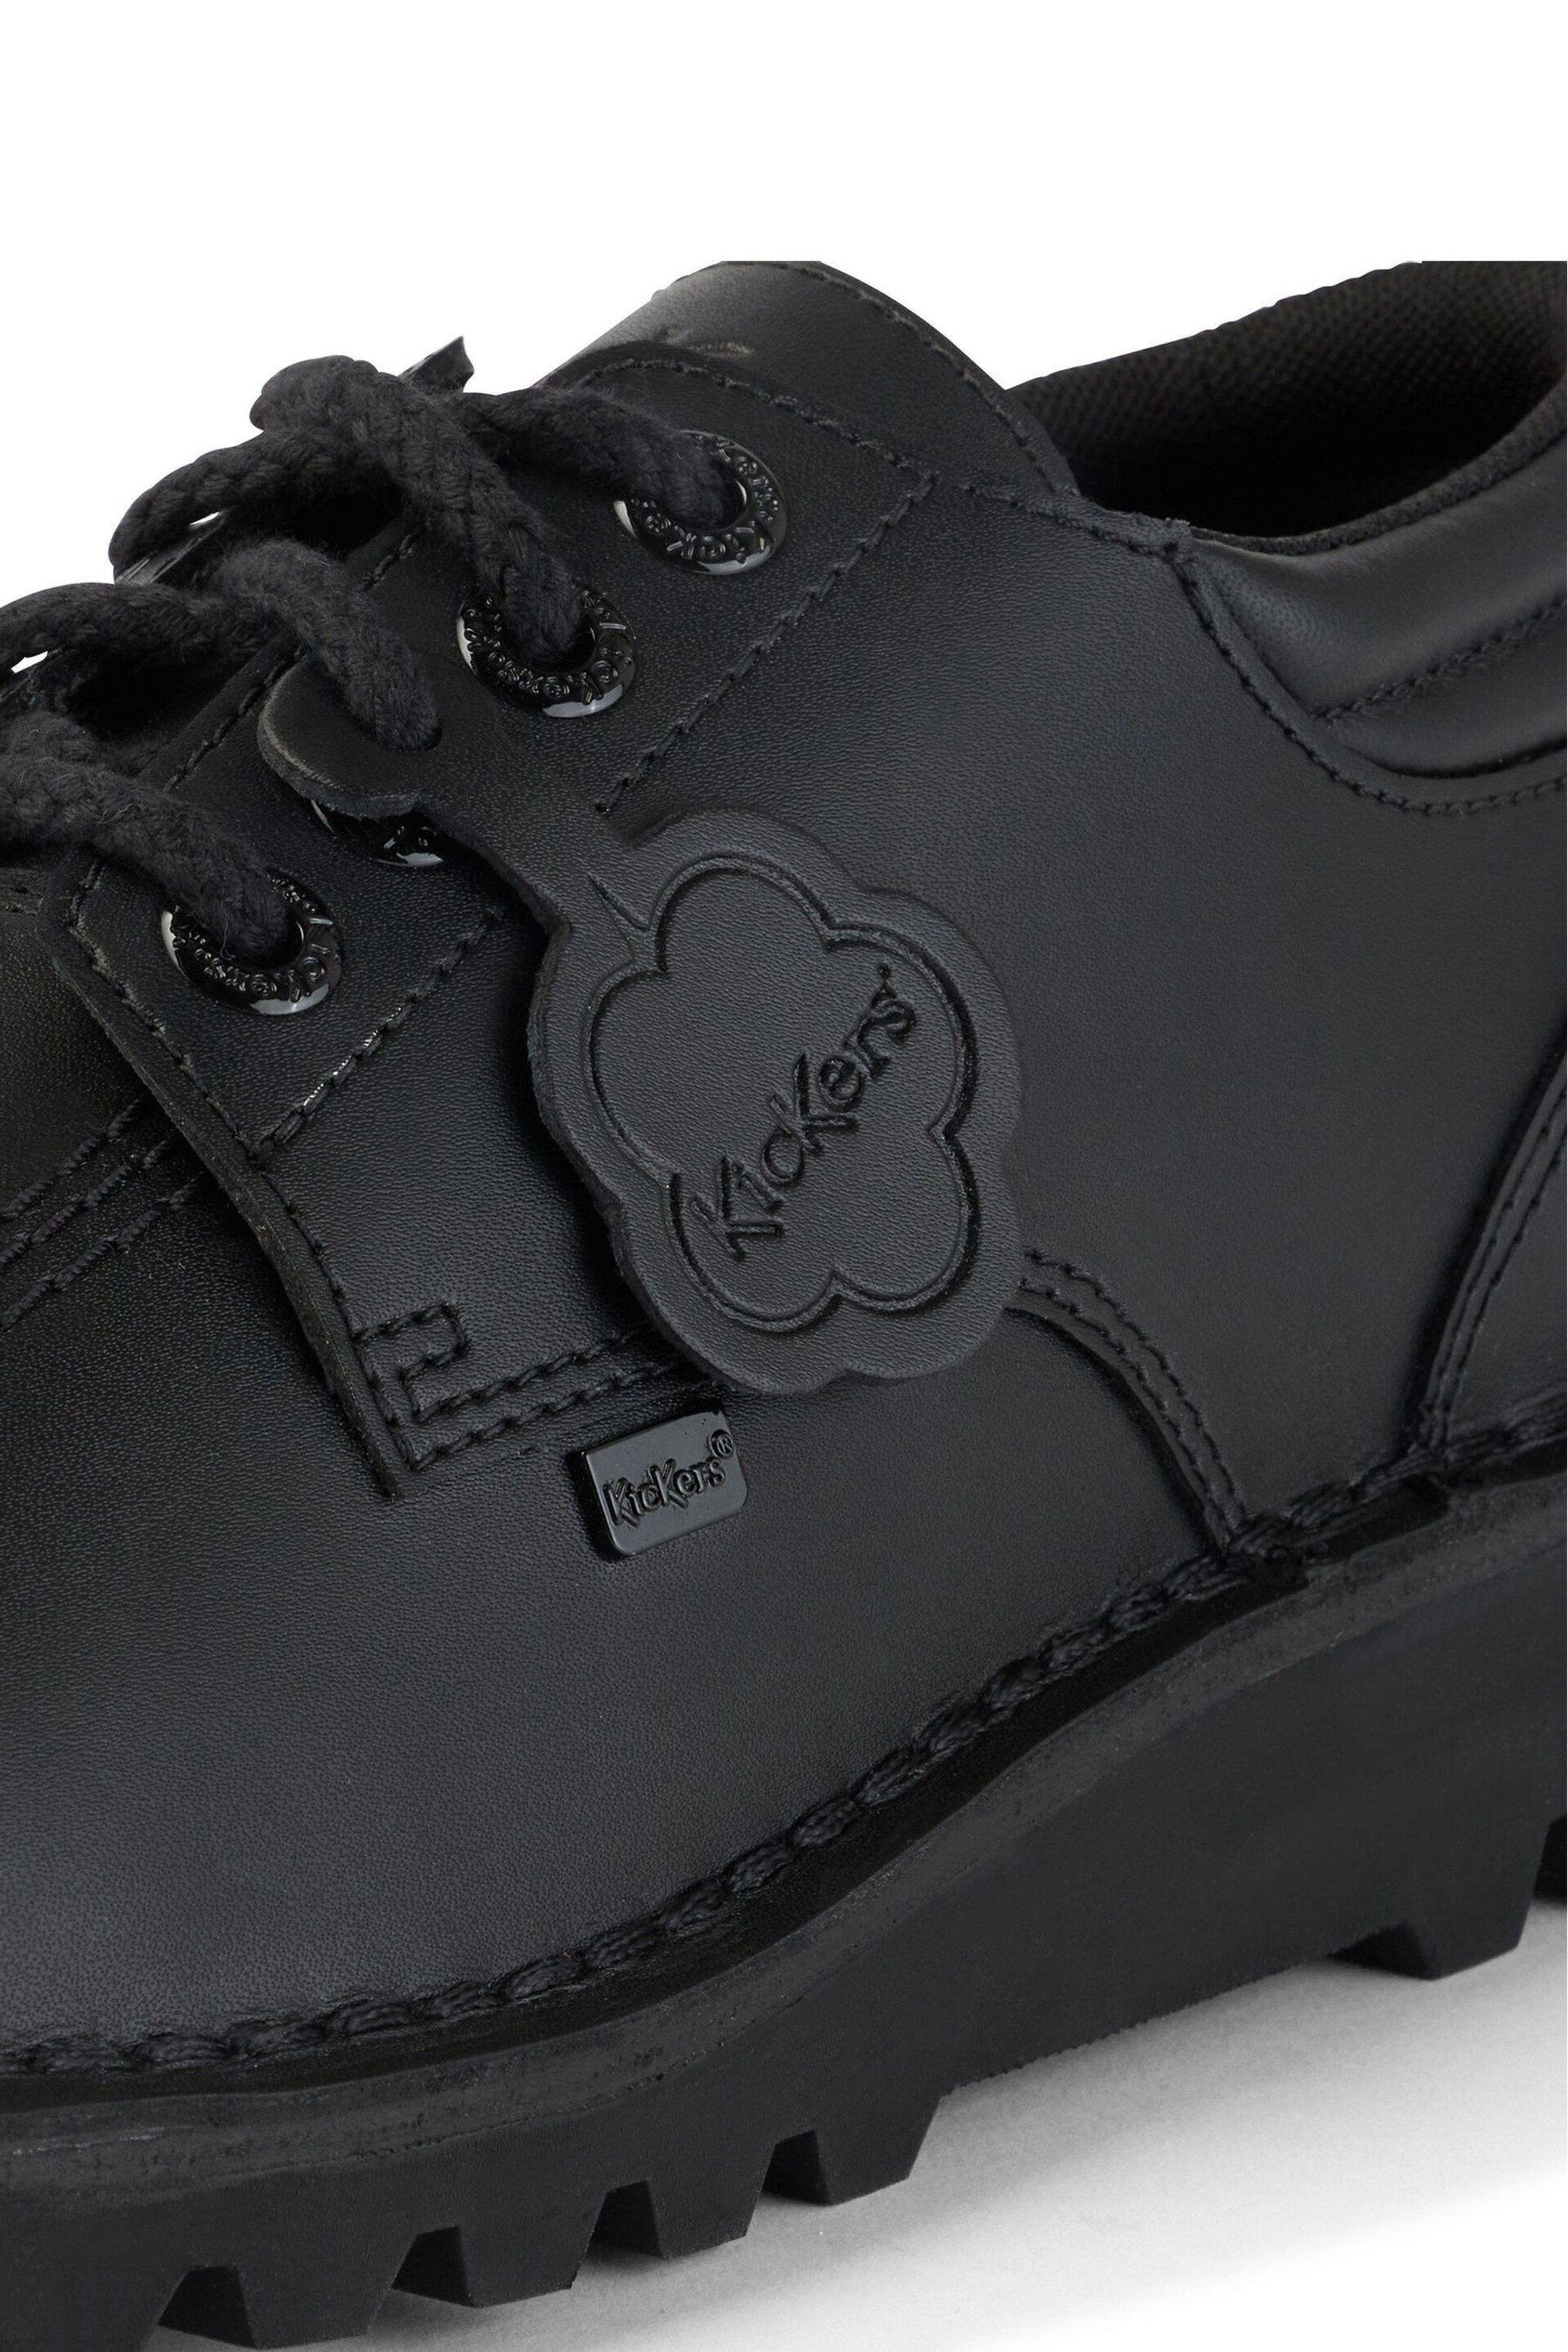 Kickers Kick Lo Padded Leather Shoes - Image 6 of 6